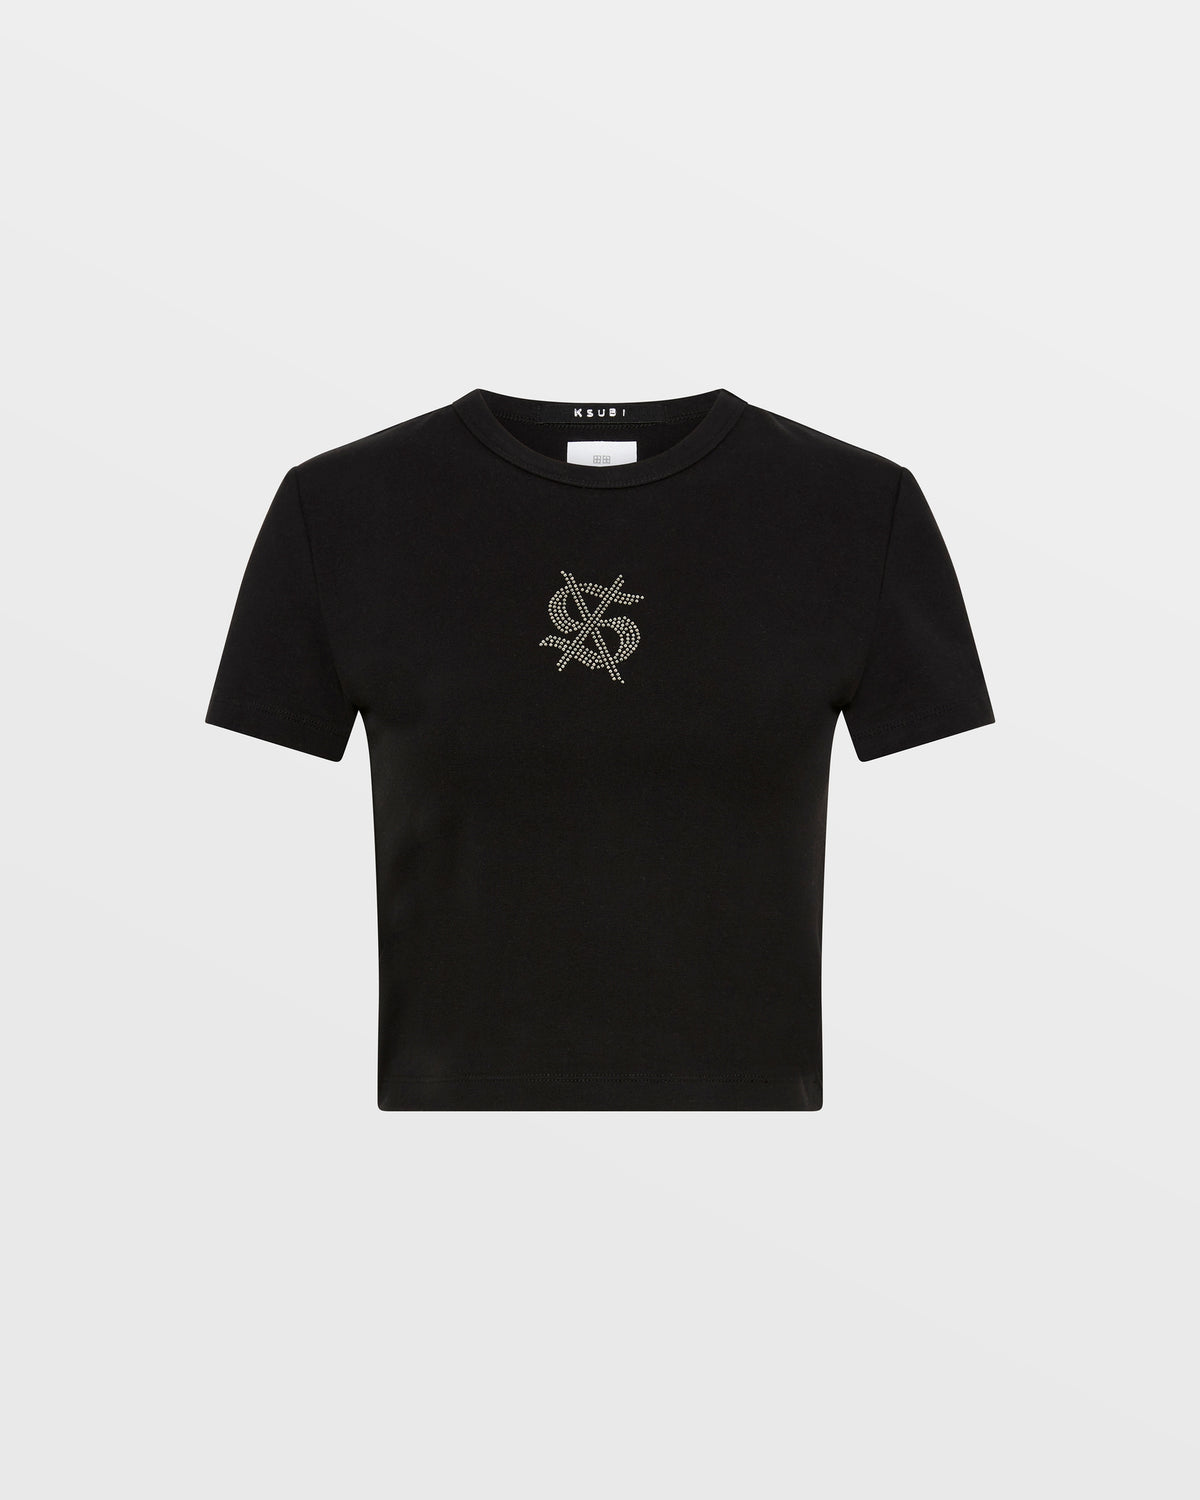 RITZY BABY SS TEE BLACK